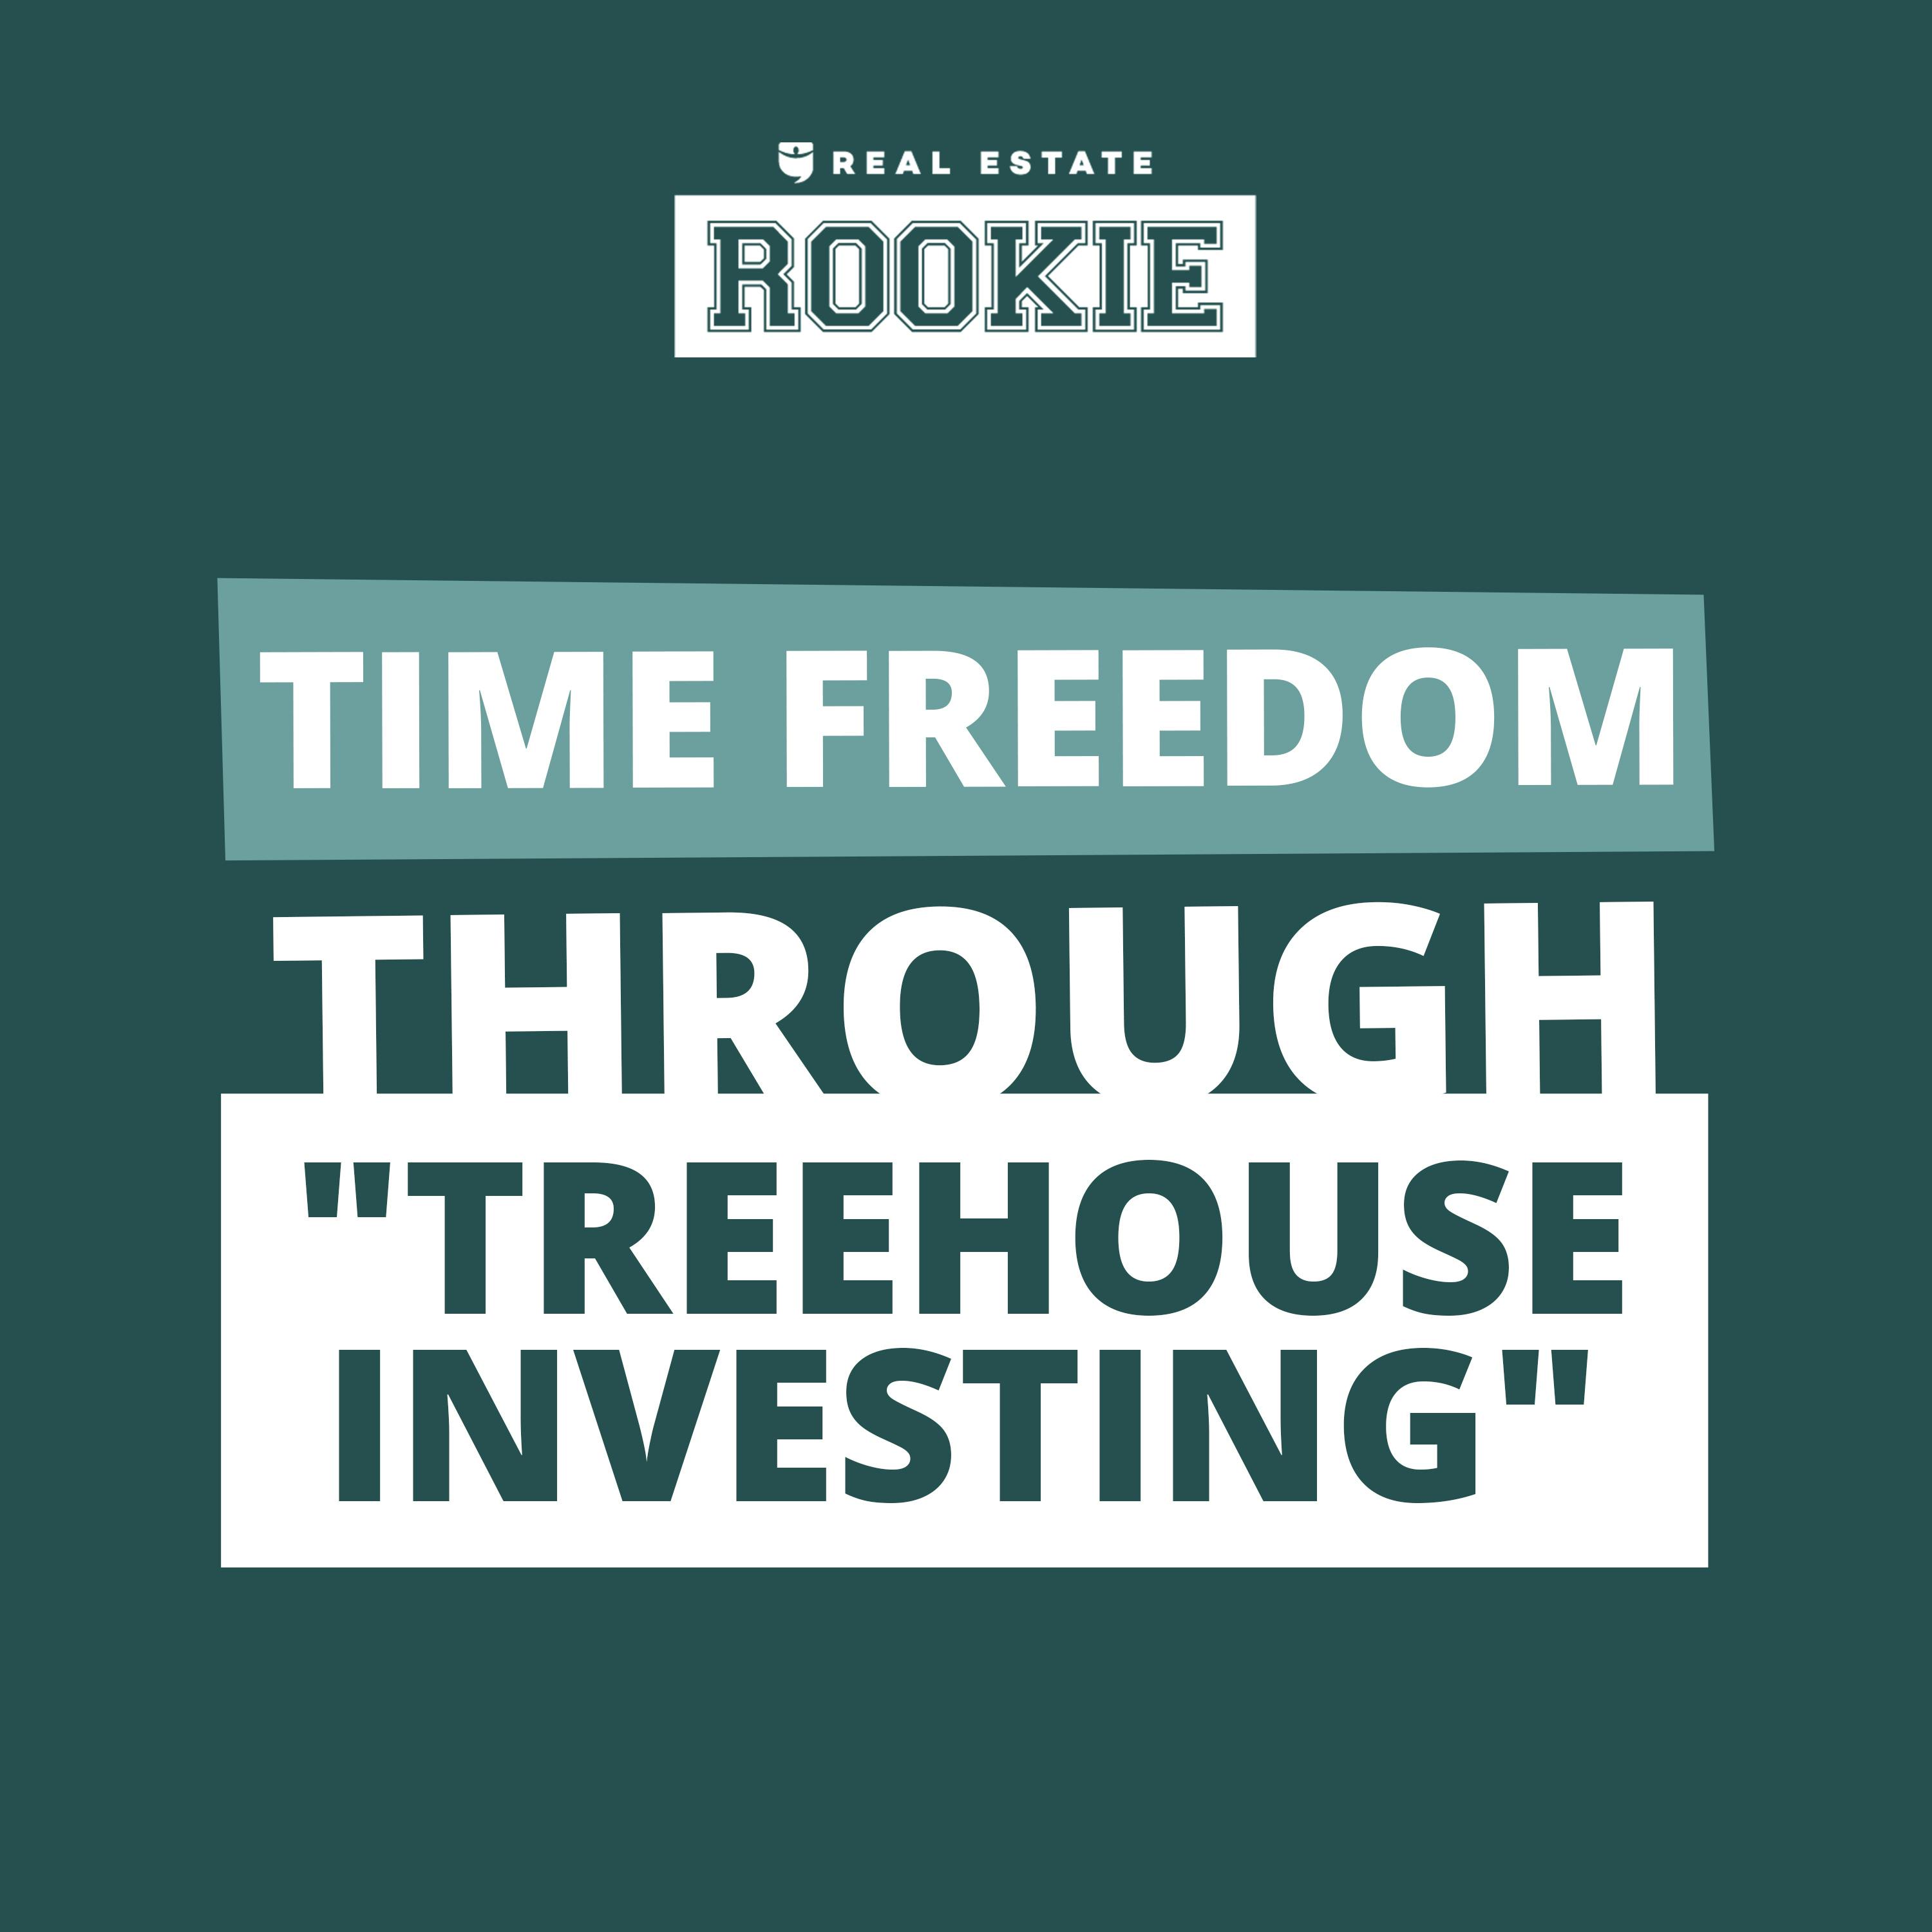 207: Working Towards Time Freedom "In the Trees" with 3 Treehouse Rentals